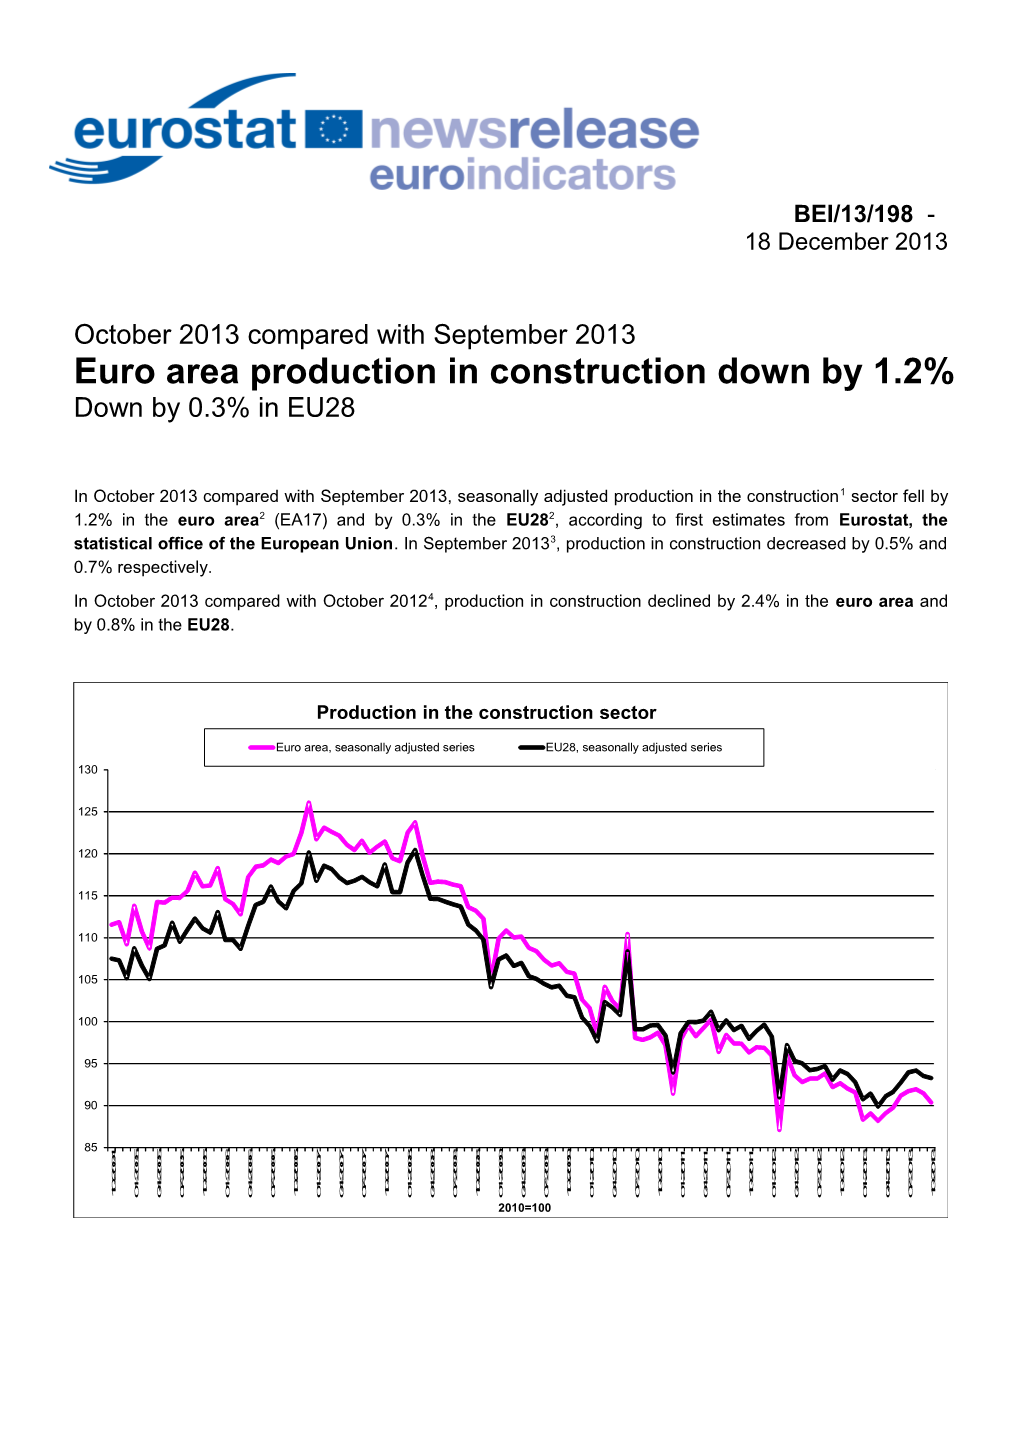 Euro Area Production in Construction Down by 1.2%